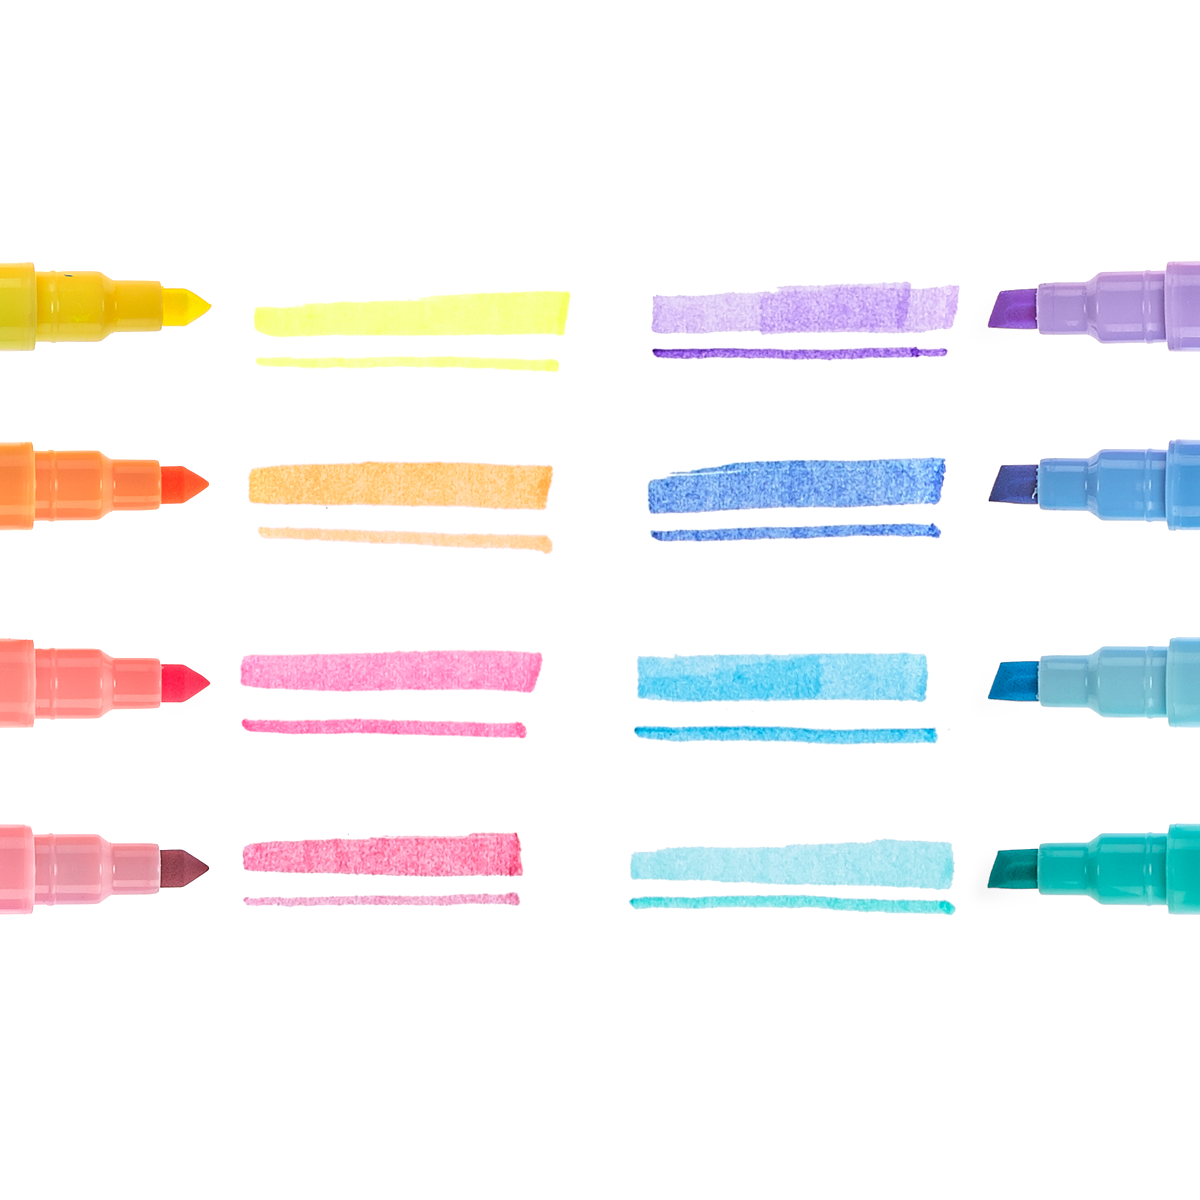 OOLY Pastel Liners Dual Tip Markers Markers